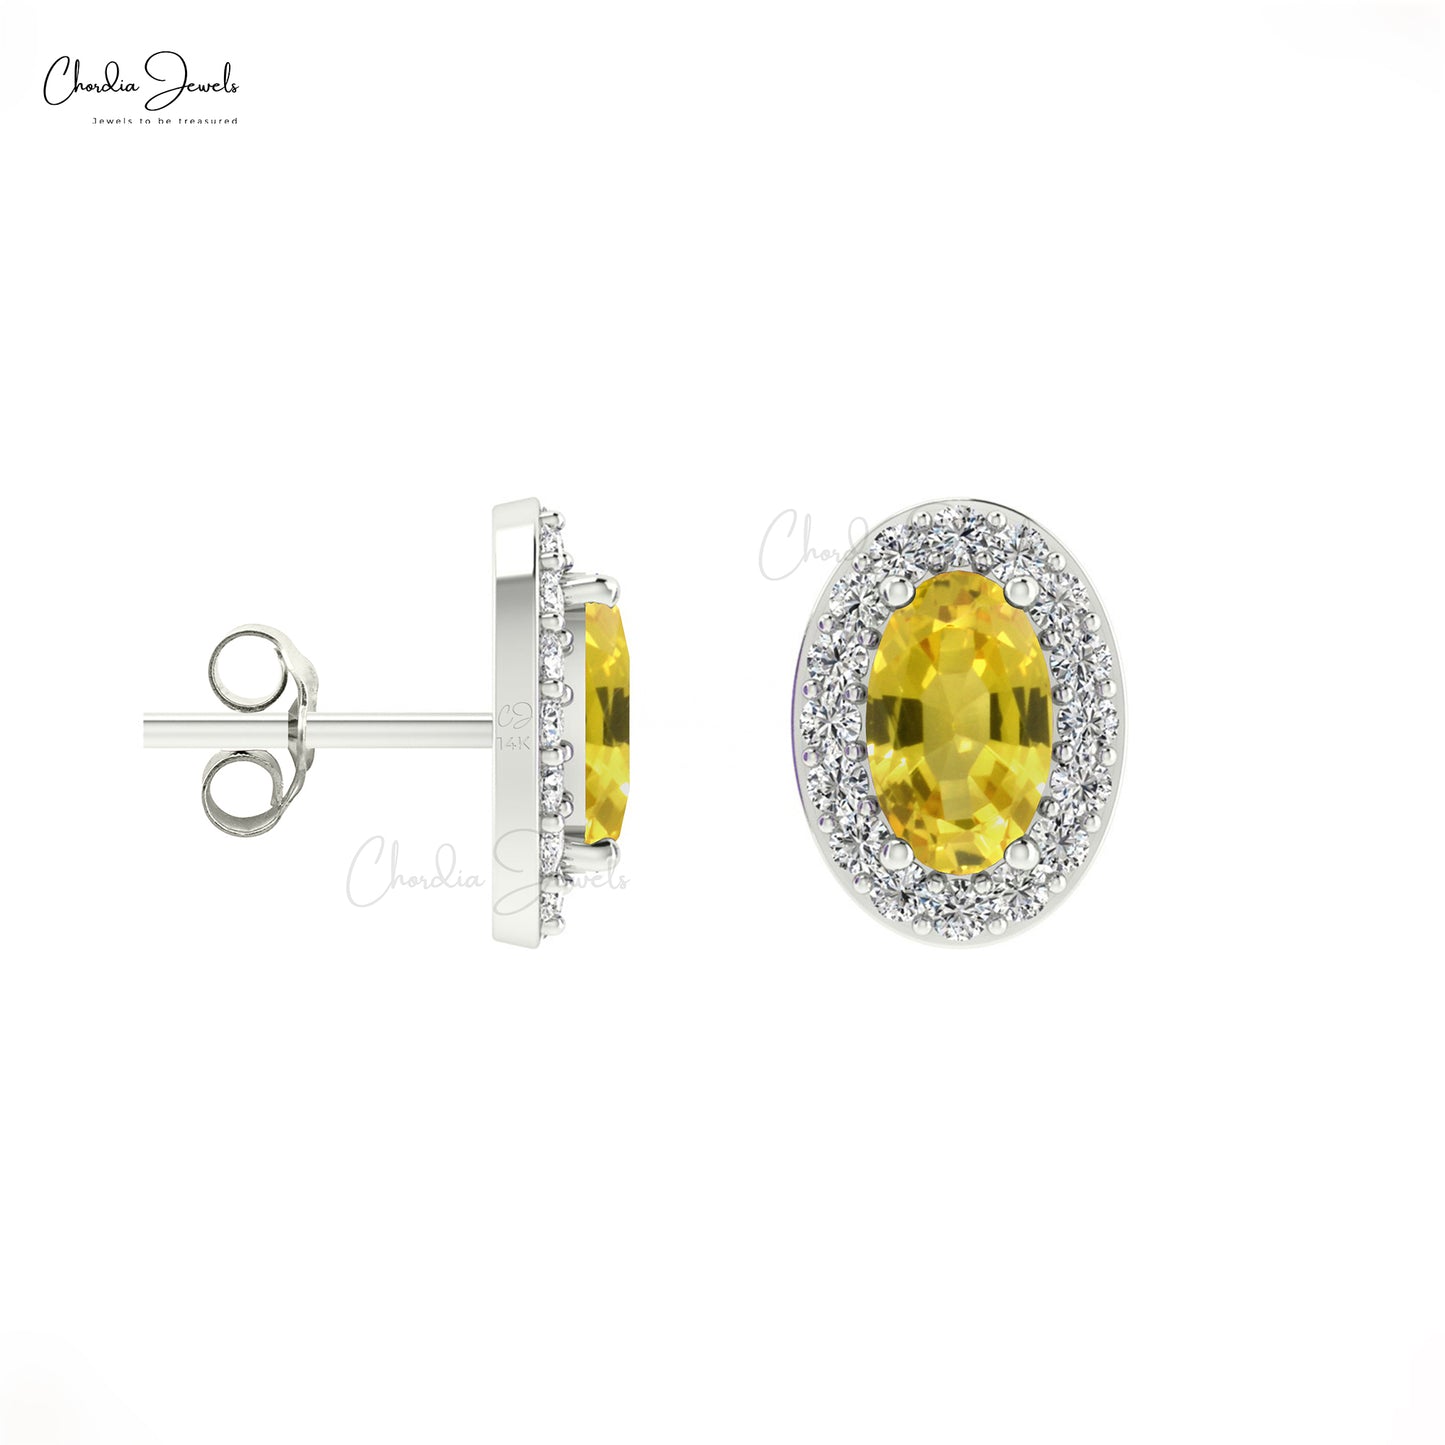 Genuine Diamond Halo & 0.54ct Yellow Sapphire Earrings 14k Solid Gold Handcrafted Studs